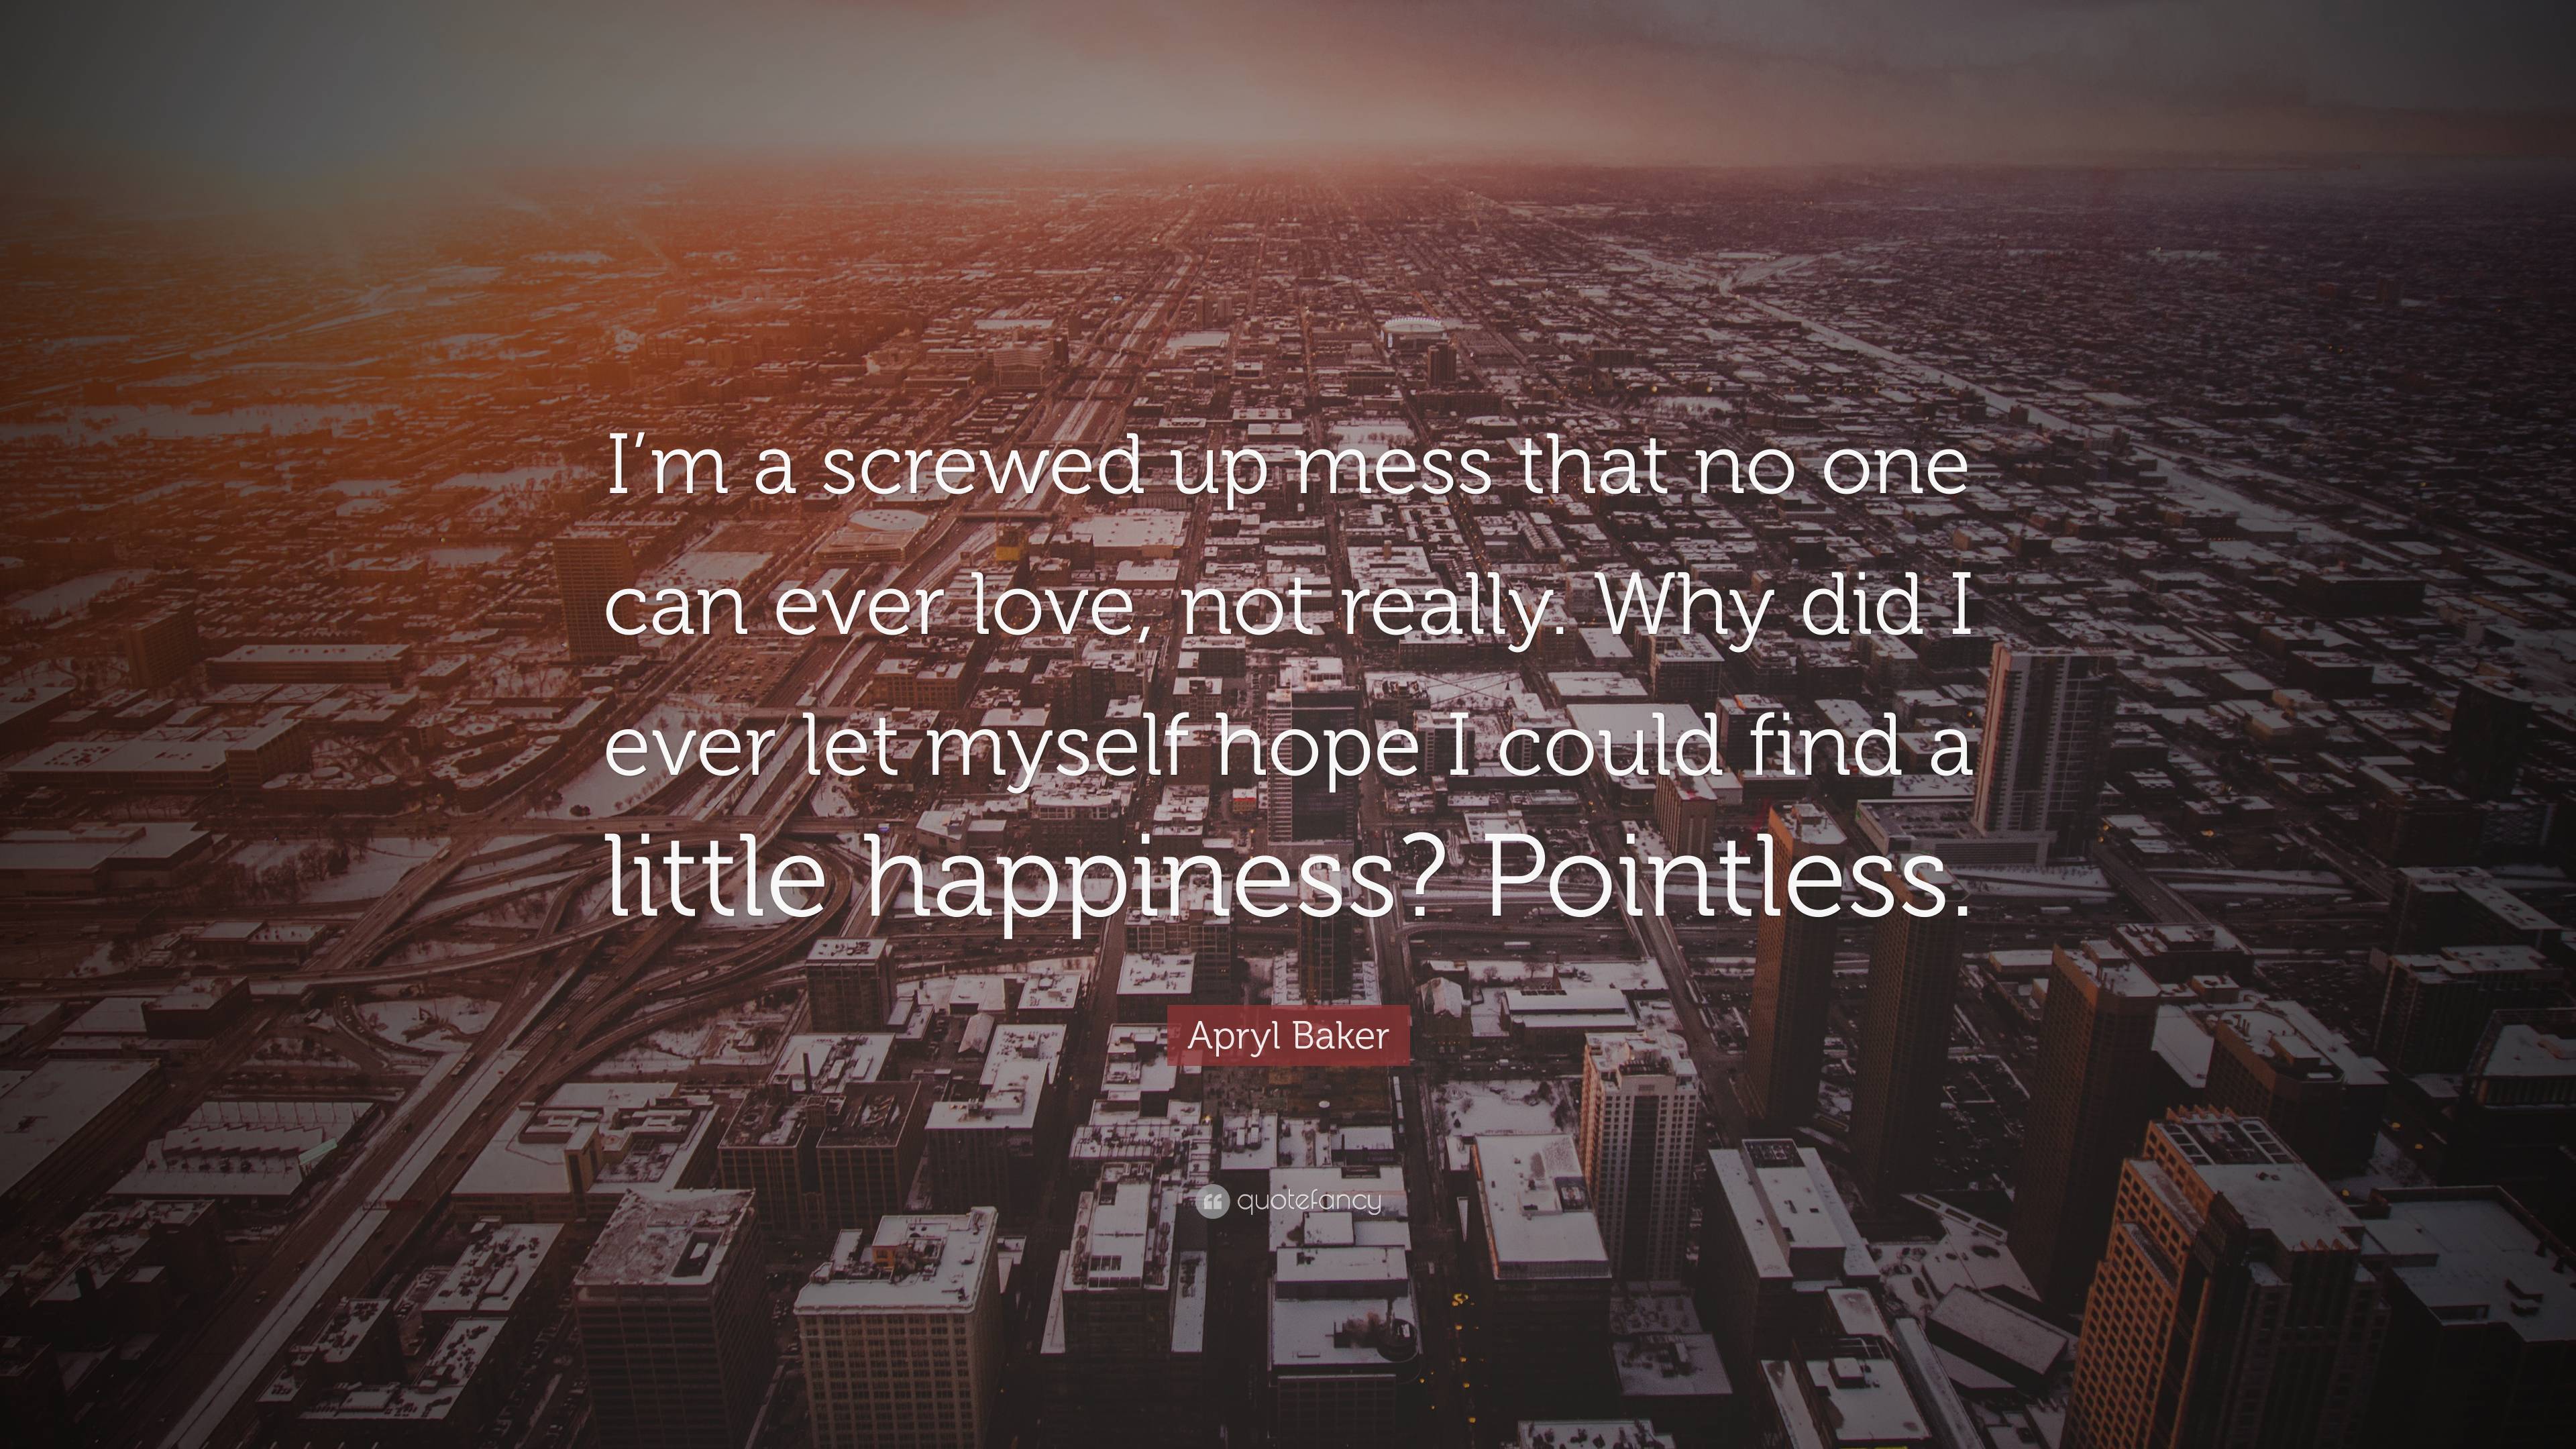 Apryl Baker Quote: “I'm a screwed up mess that no one can ever love, not really. Why did I ever let myself hope I could find a little happin.” (2 wallpaper)